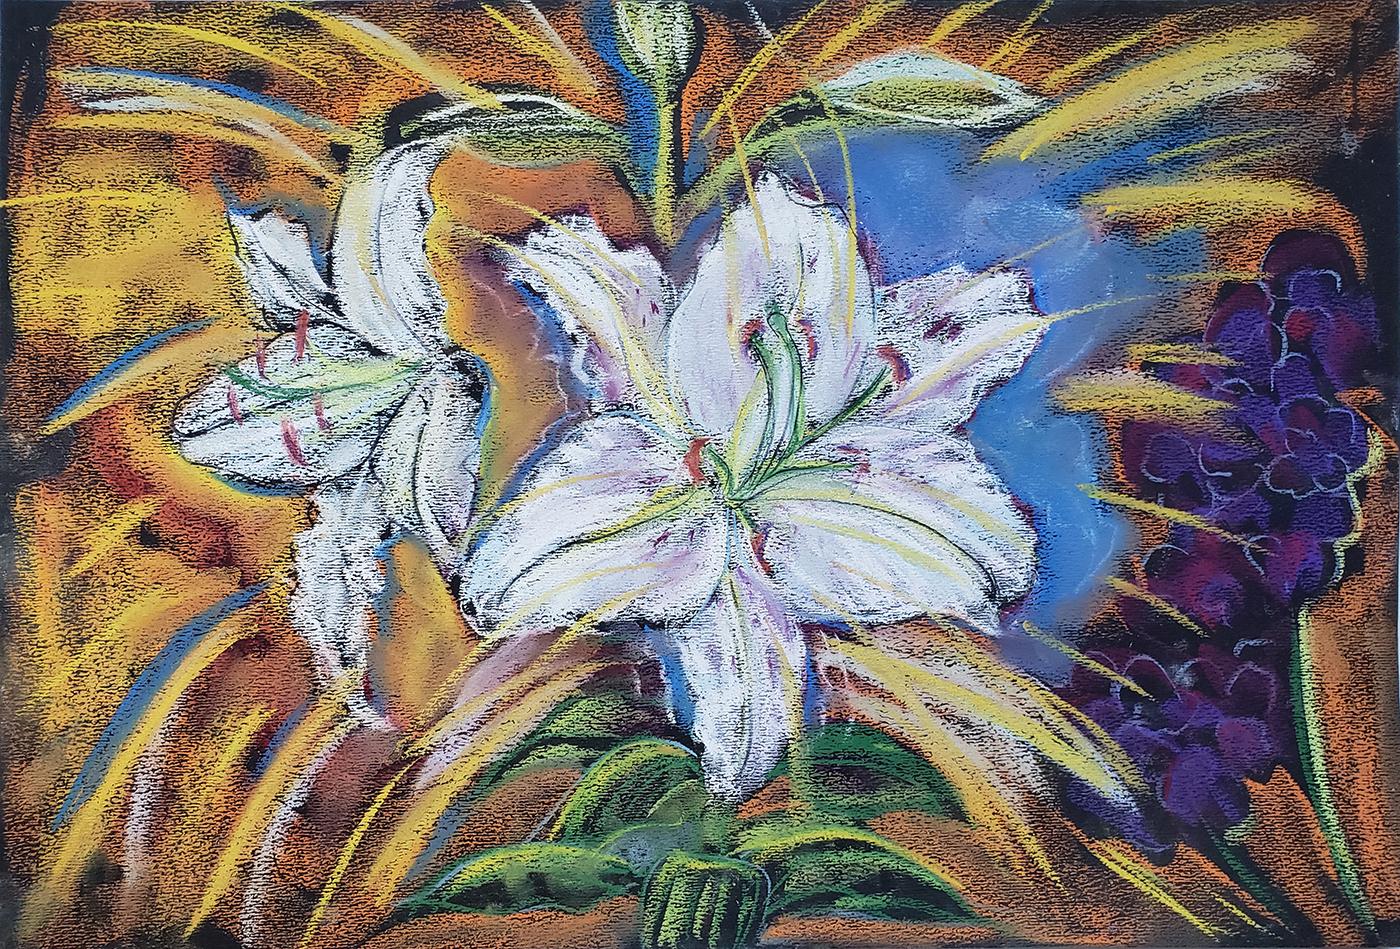 Pastel on black paper.  
Ms. Morgan says:
During 2020 we discovered a small garden next to a church in our neighborhood in Brooklyn that was well taken care of and always open. We brought our ground chairs and art supplies and looked the flowers in